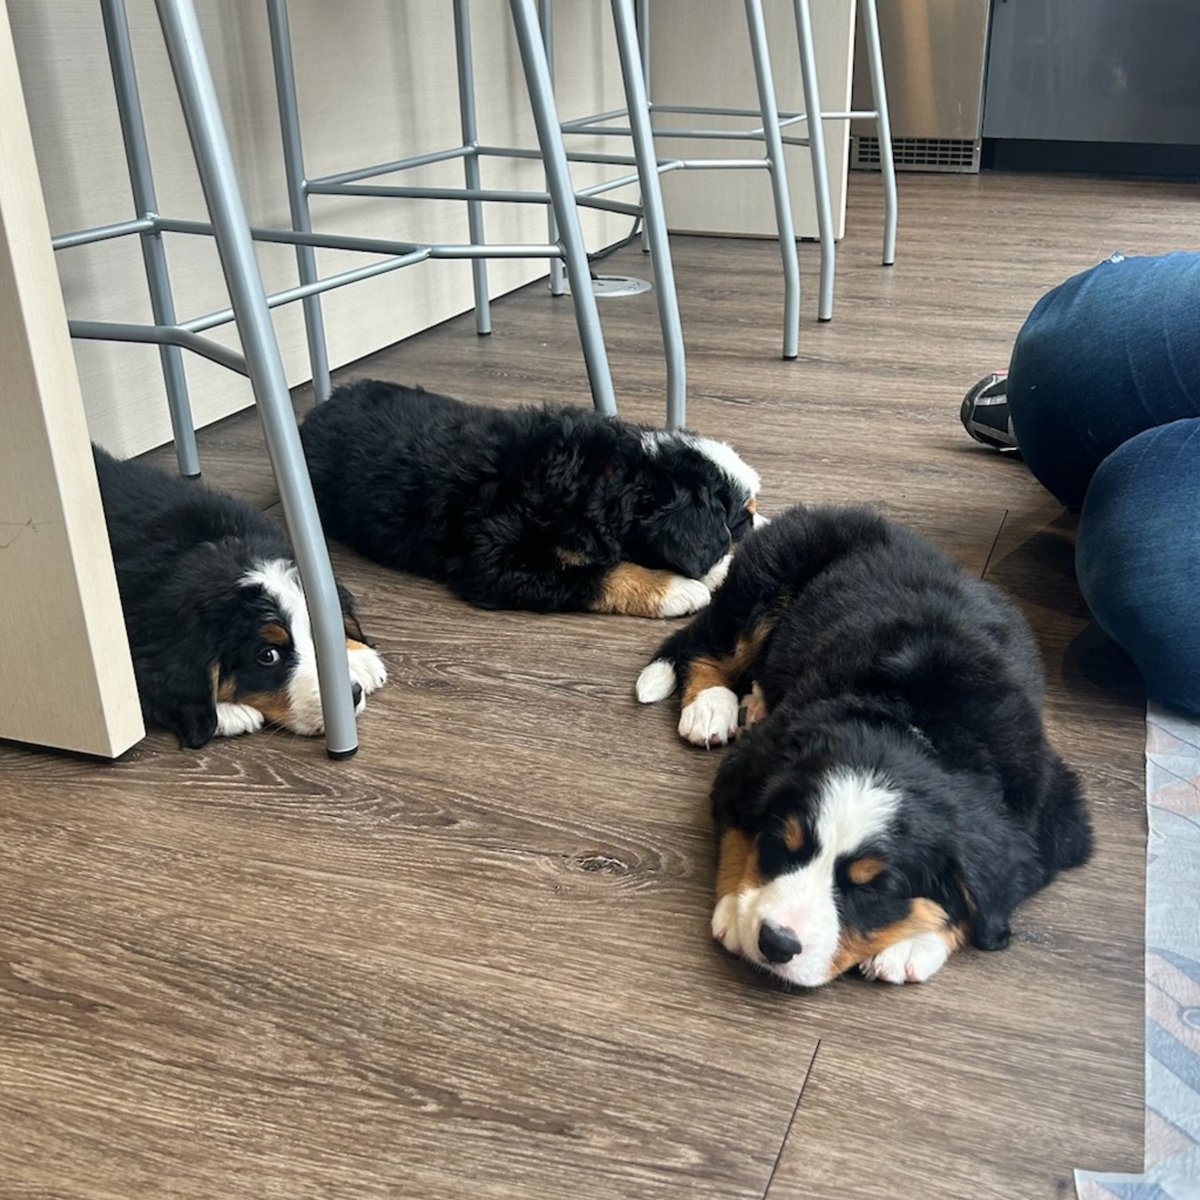 ⚠️ CUTE PUPPIES ALERT! ⚠️ Our Member Business Services team had an extra special visit from an employee's sister's adorable litter of puppies this week! It was such a fun day filled with lots of cuddles and play time with these fluffy little guys. The visit has even inspired the